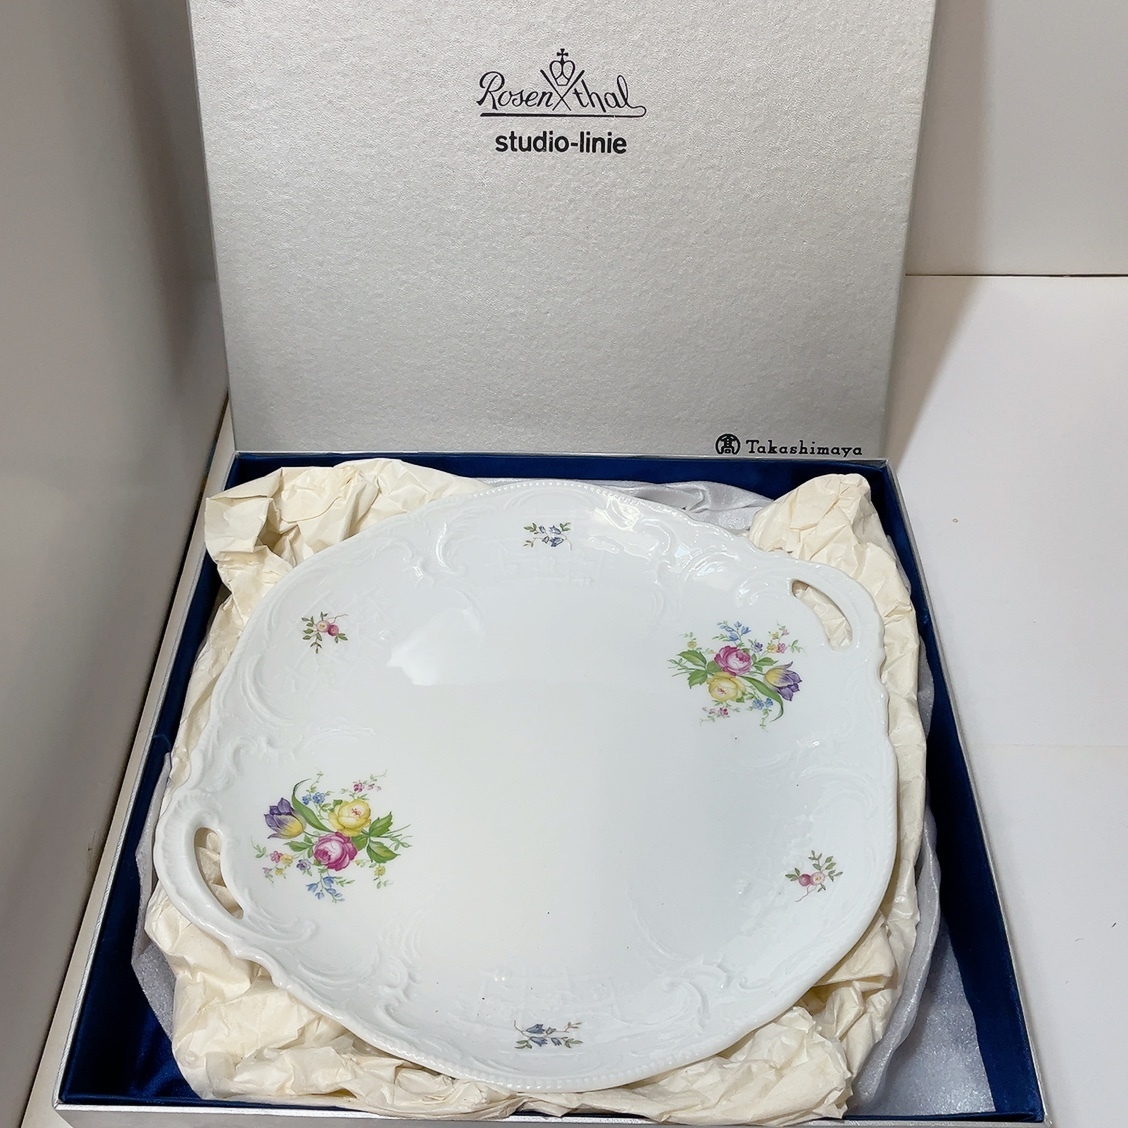  free shipping prompt decision unused storage goods * Rosenthal large plate Classic Rose studio-linie Western-style tableware 